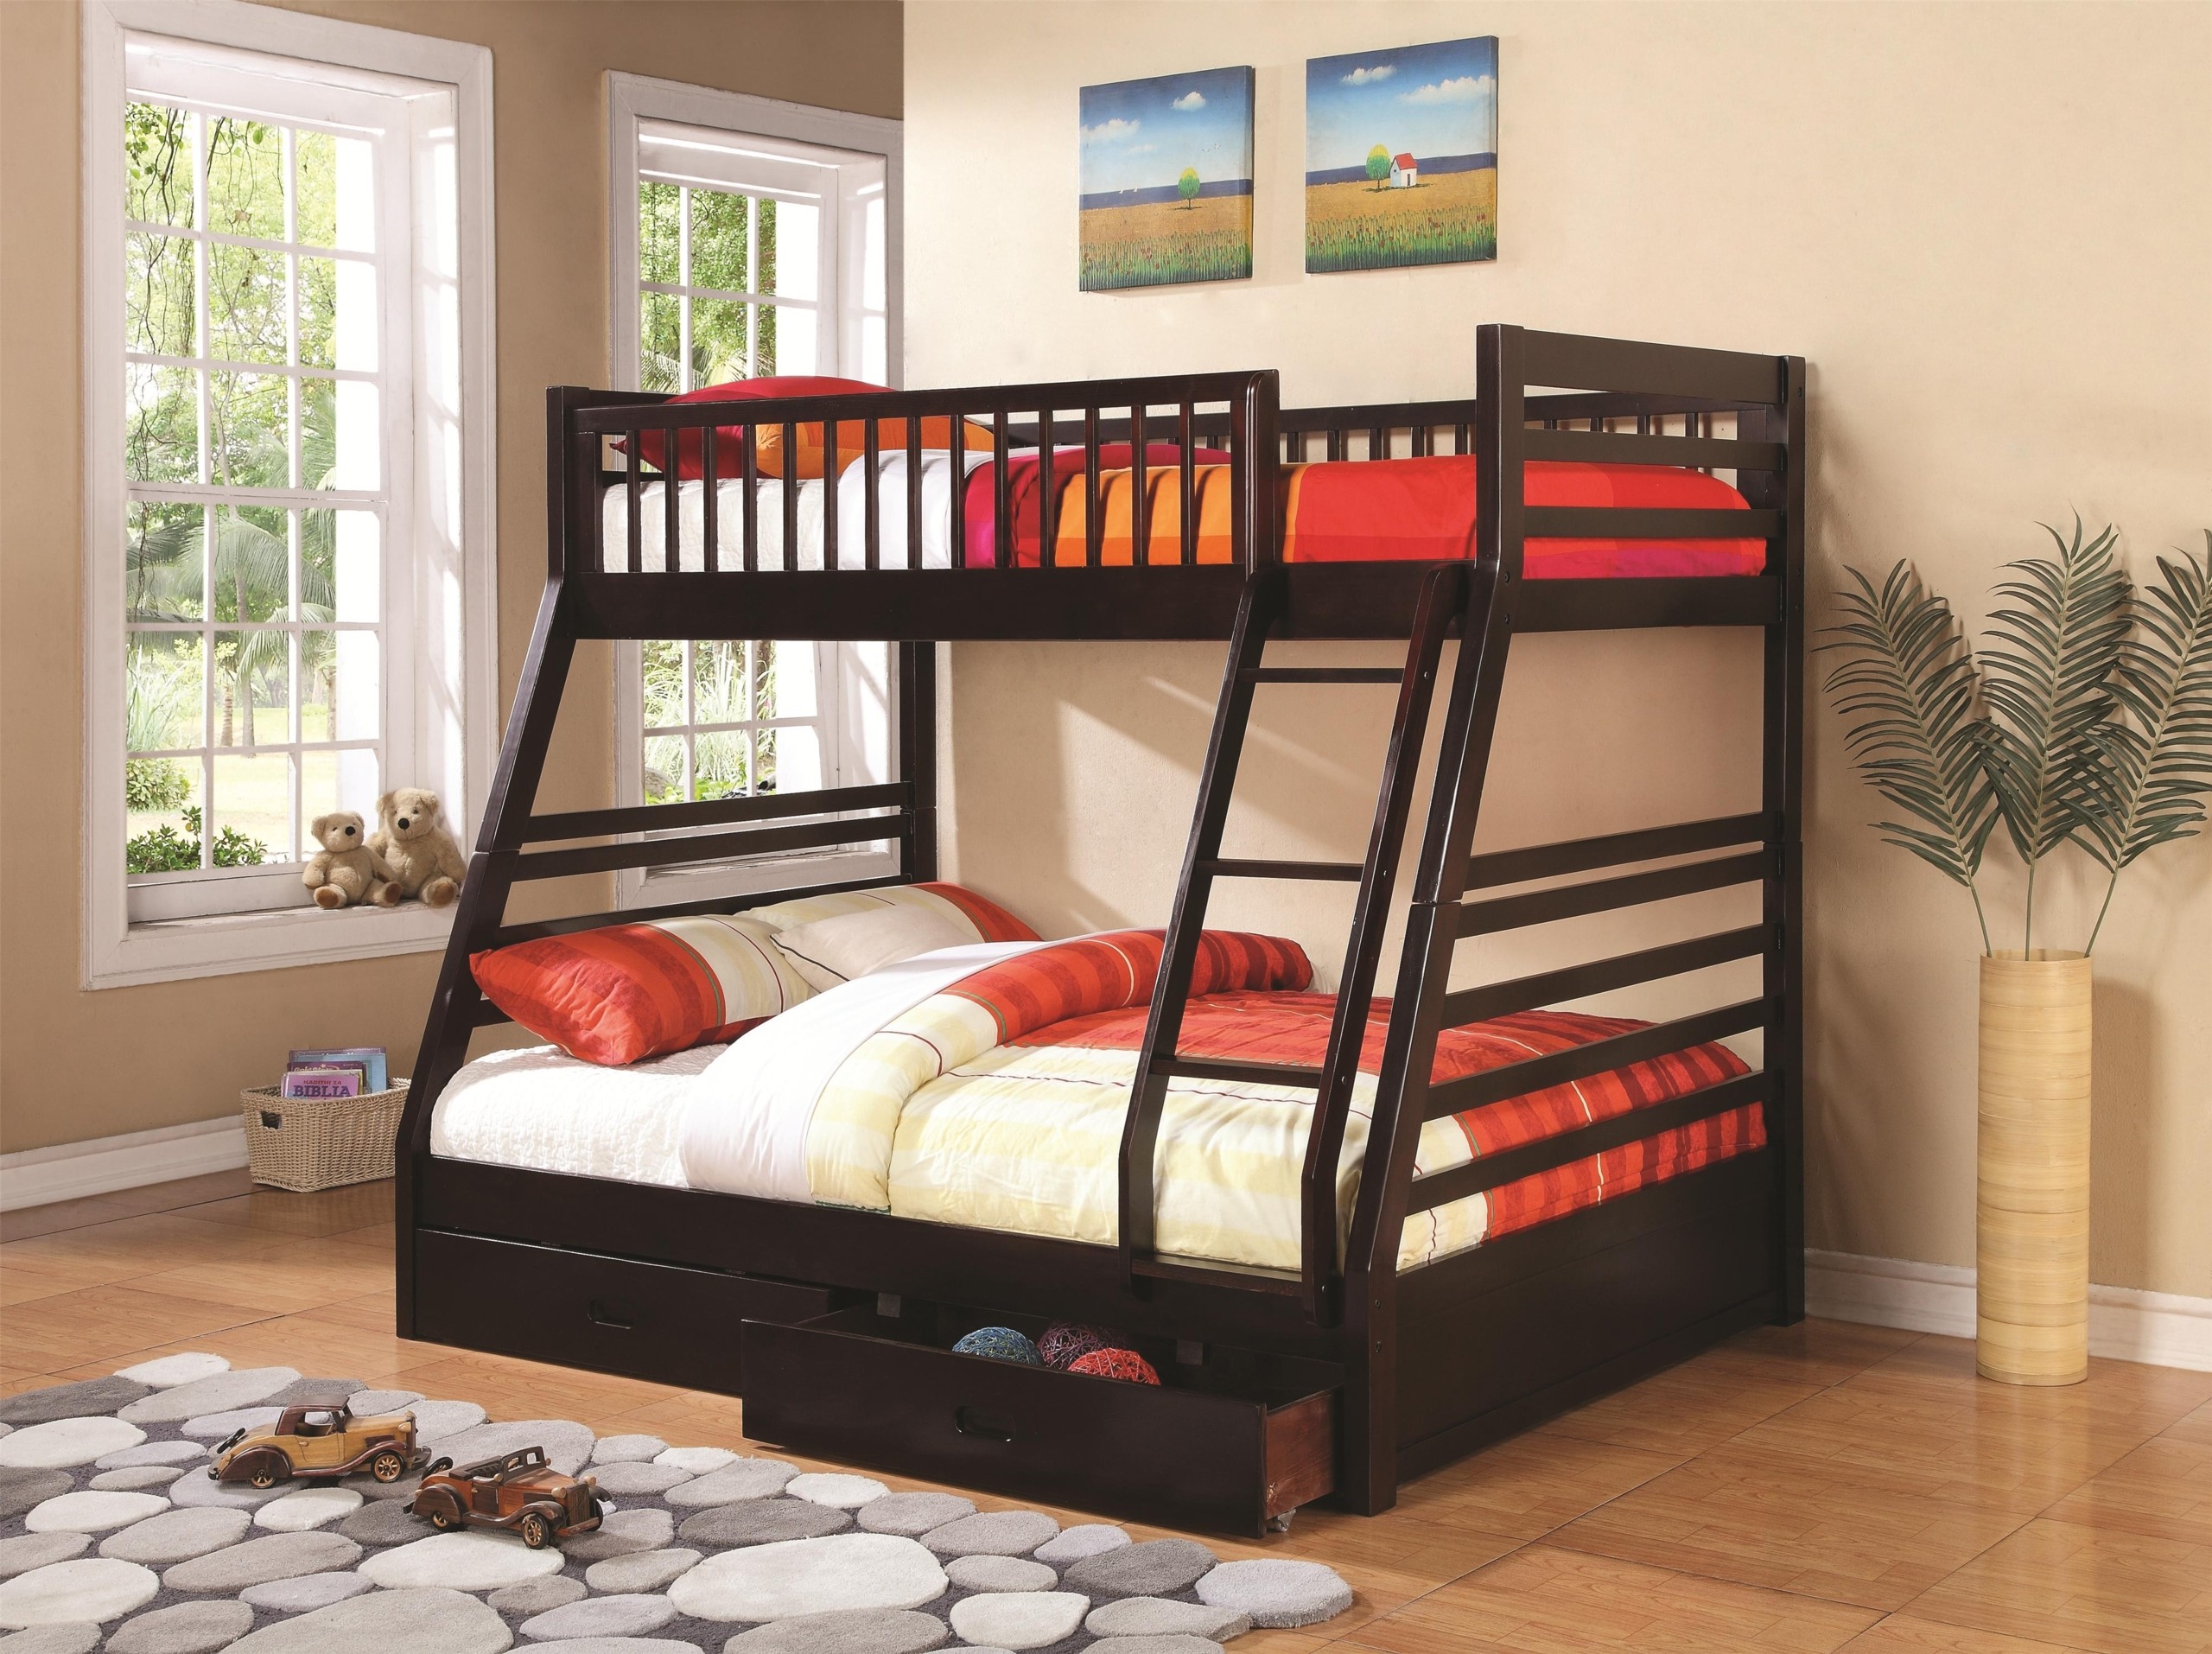 Bunk beds with full bottom